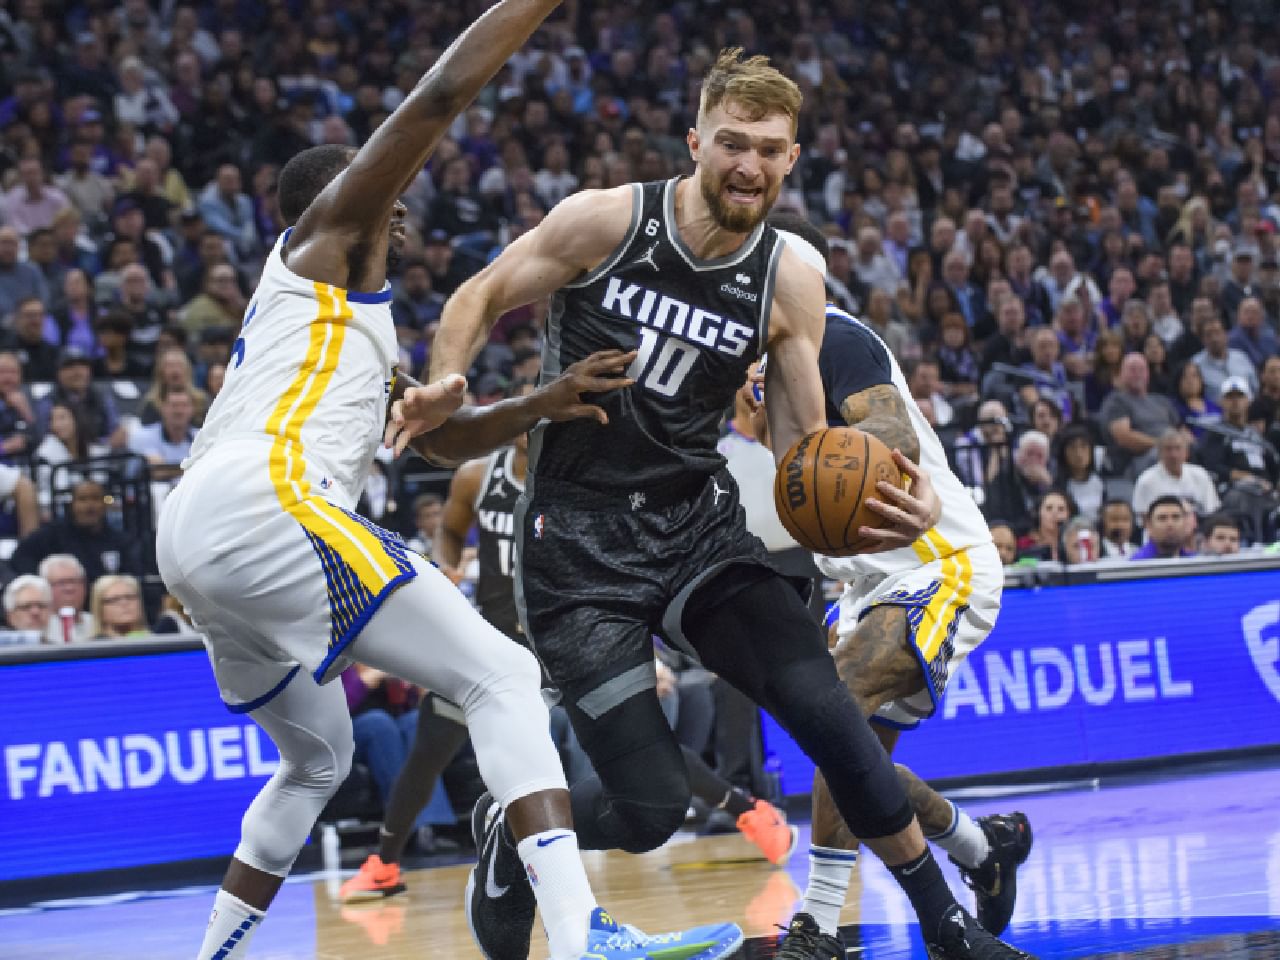 Watch video: Green-Sabonis in an ugly tangle as Kings extend lead over Warriors in NBA playoff series